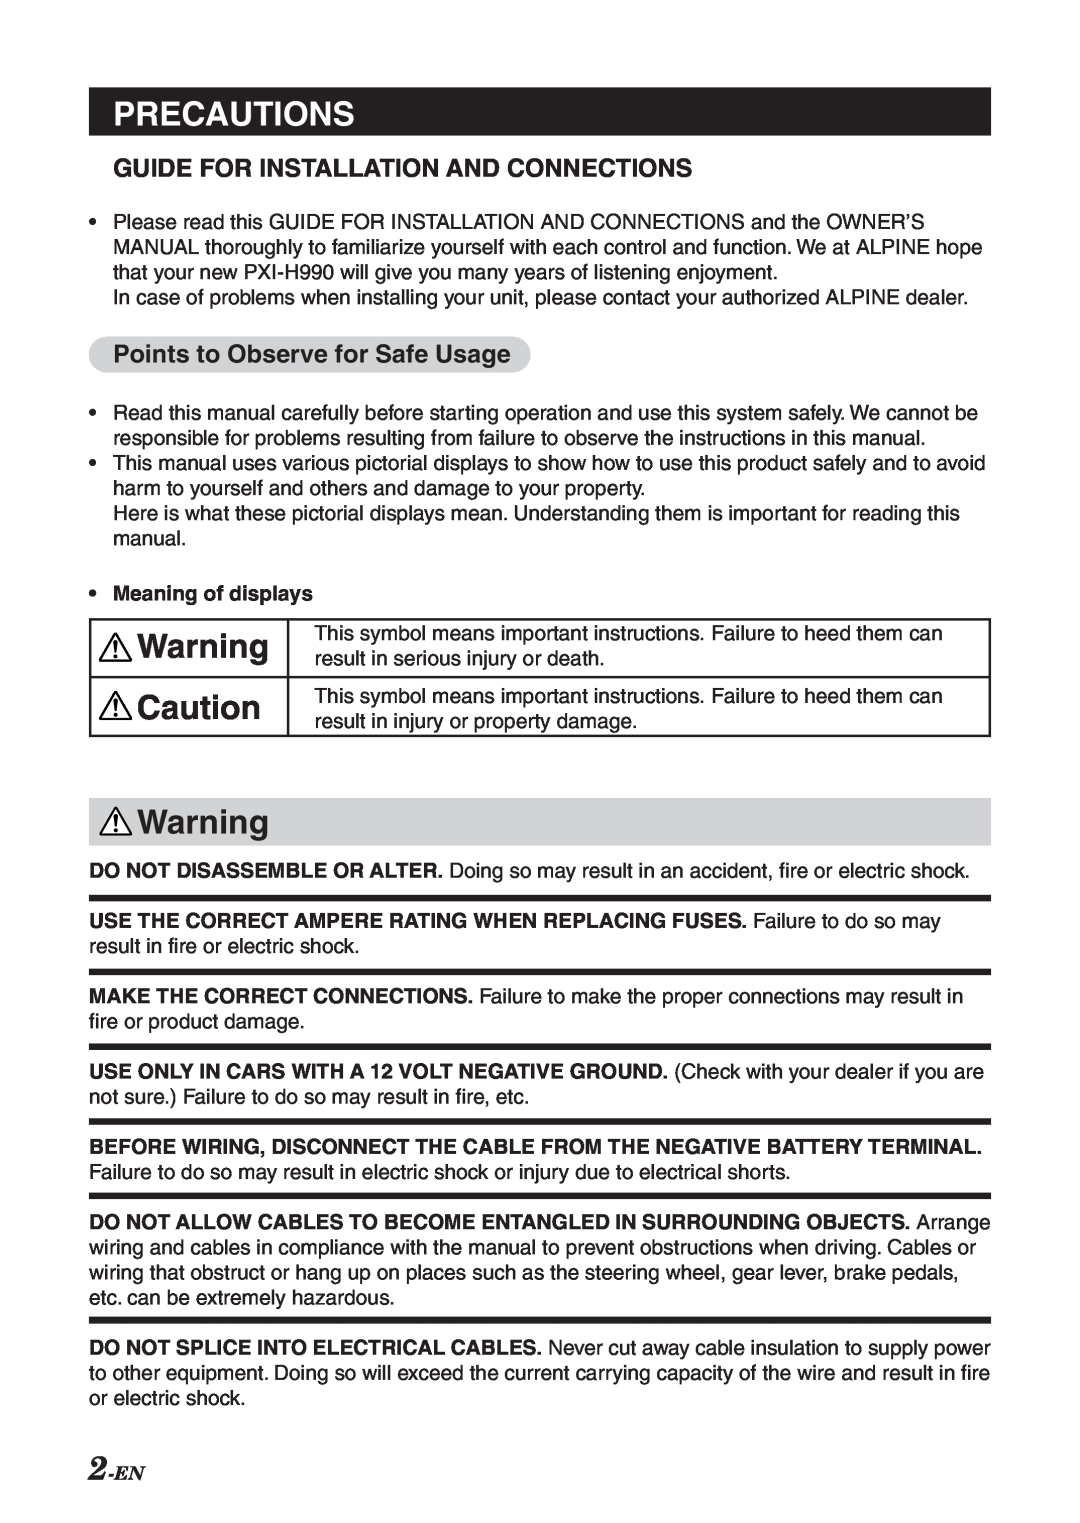 Alpine PXI-H990 manual Precautions, Guide For Installation And Connections, Points to Observe for Safe Usage 